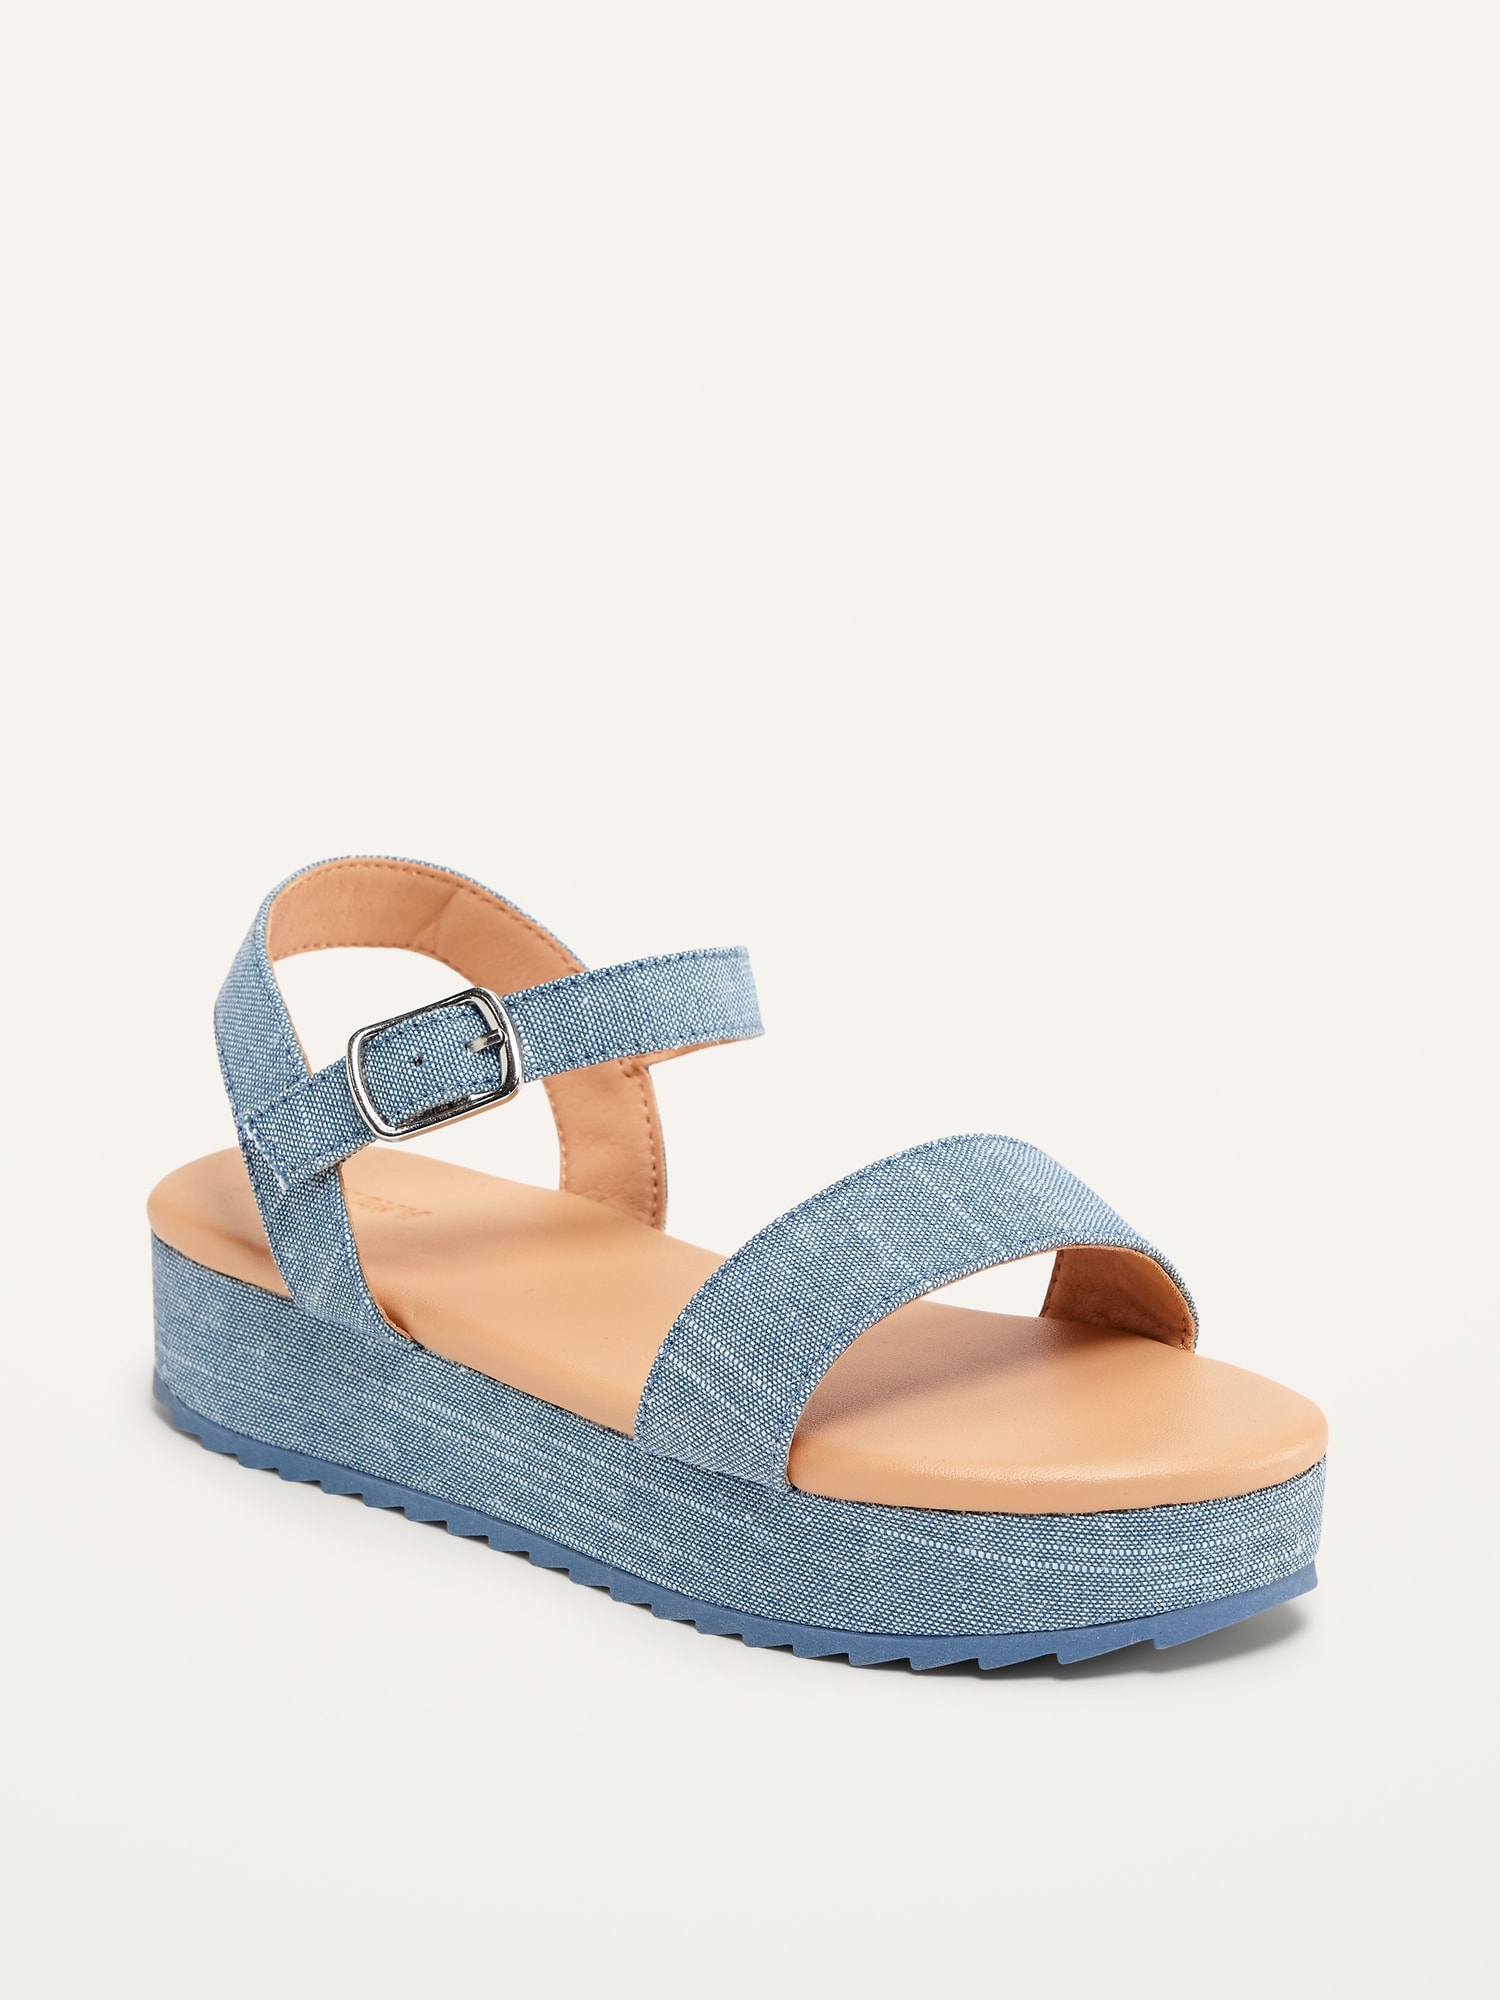 Chambray Platform Sandals for Girls | Old Navy